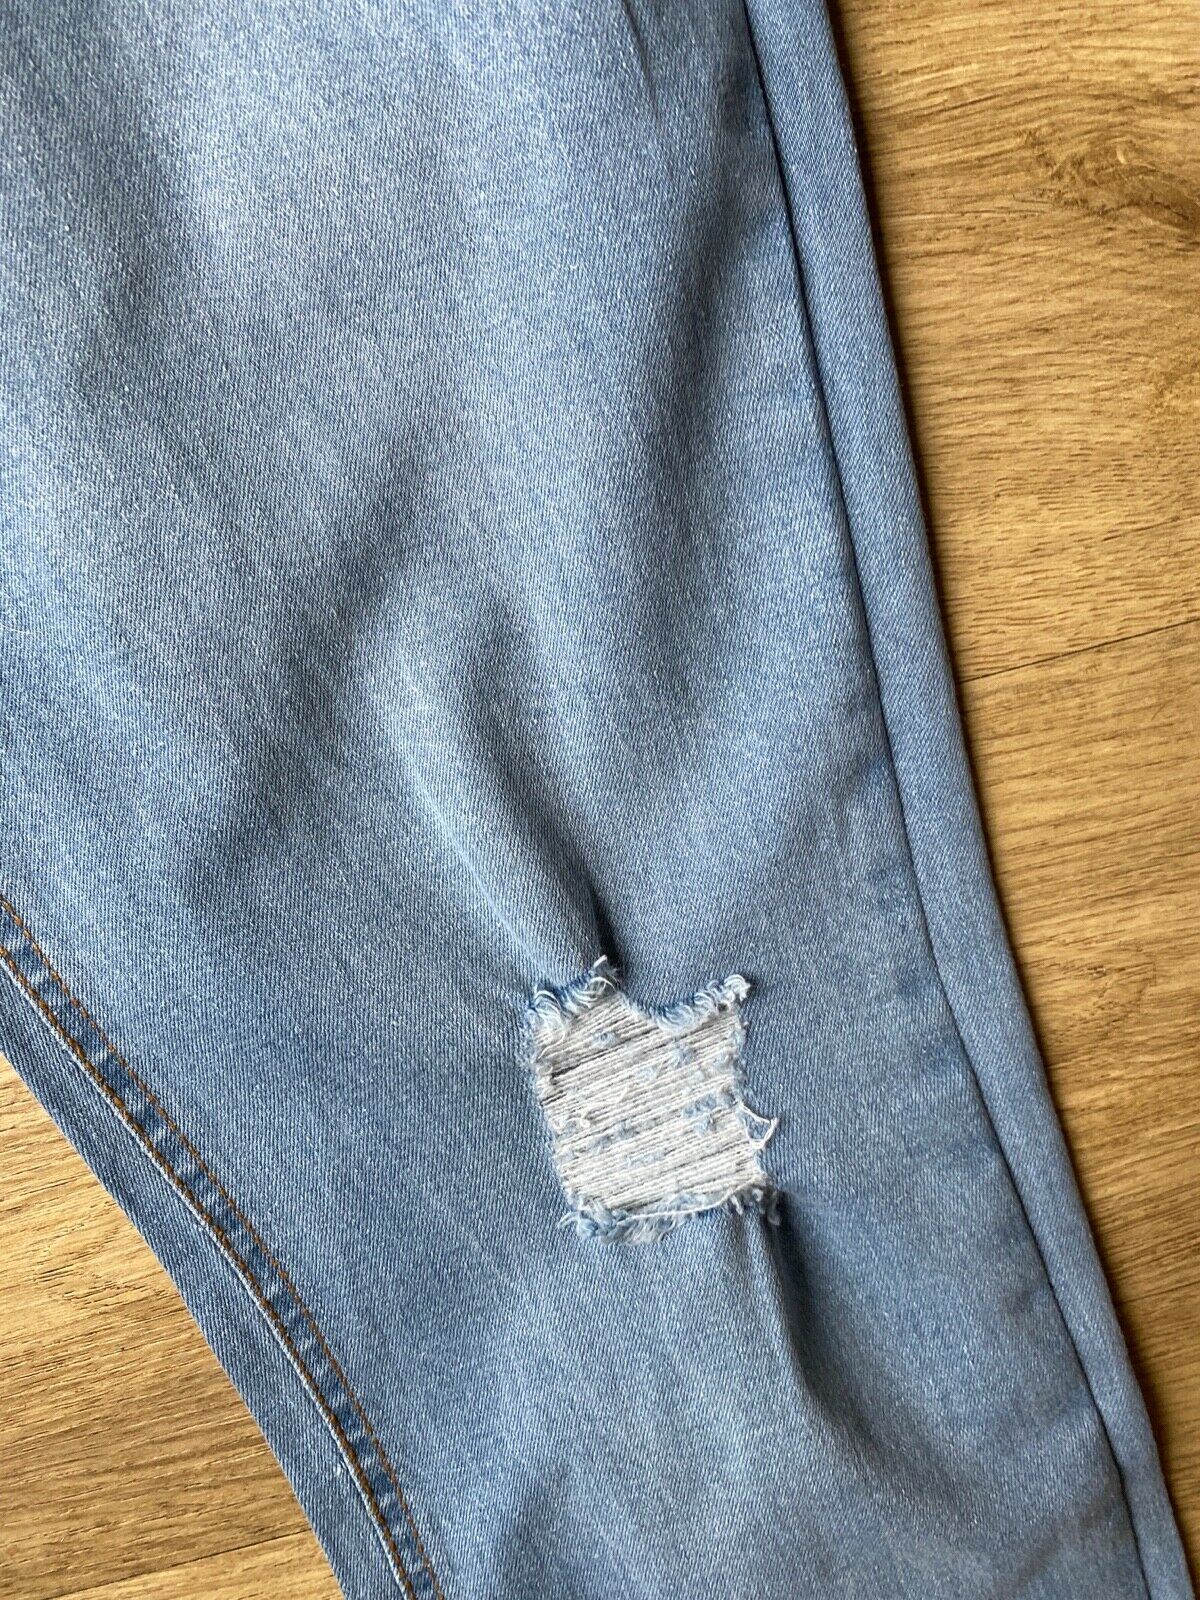 Another Influence Light Blue Jeans Size W36 R L32" Ripped Knees